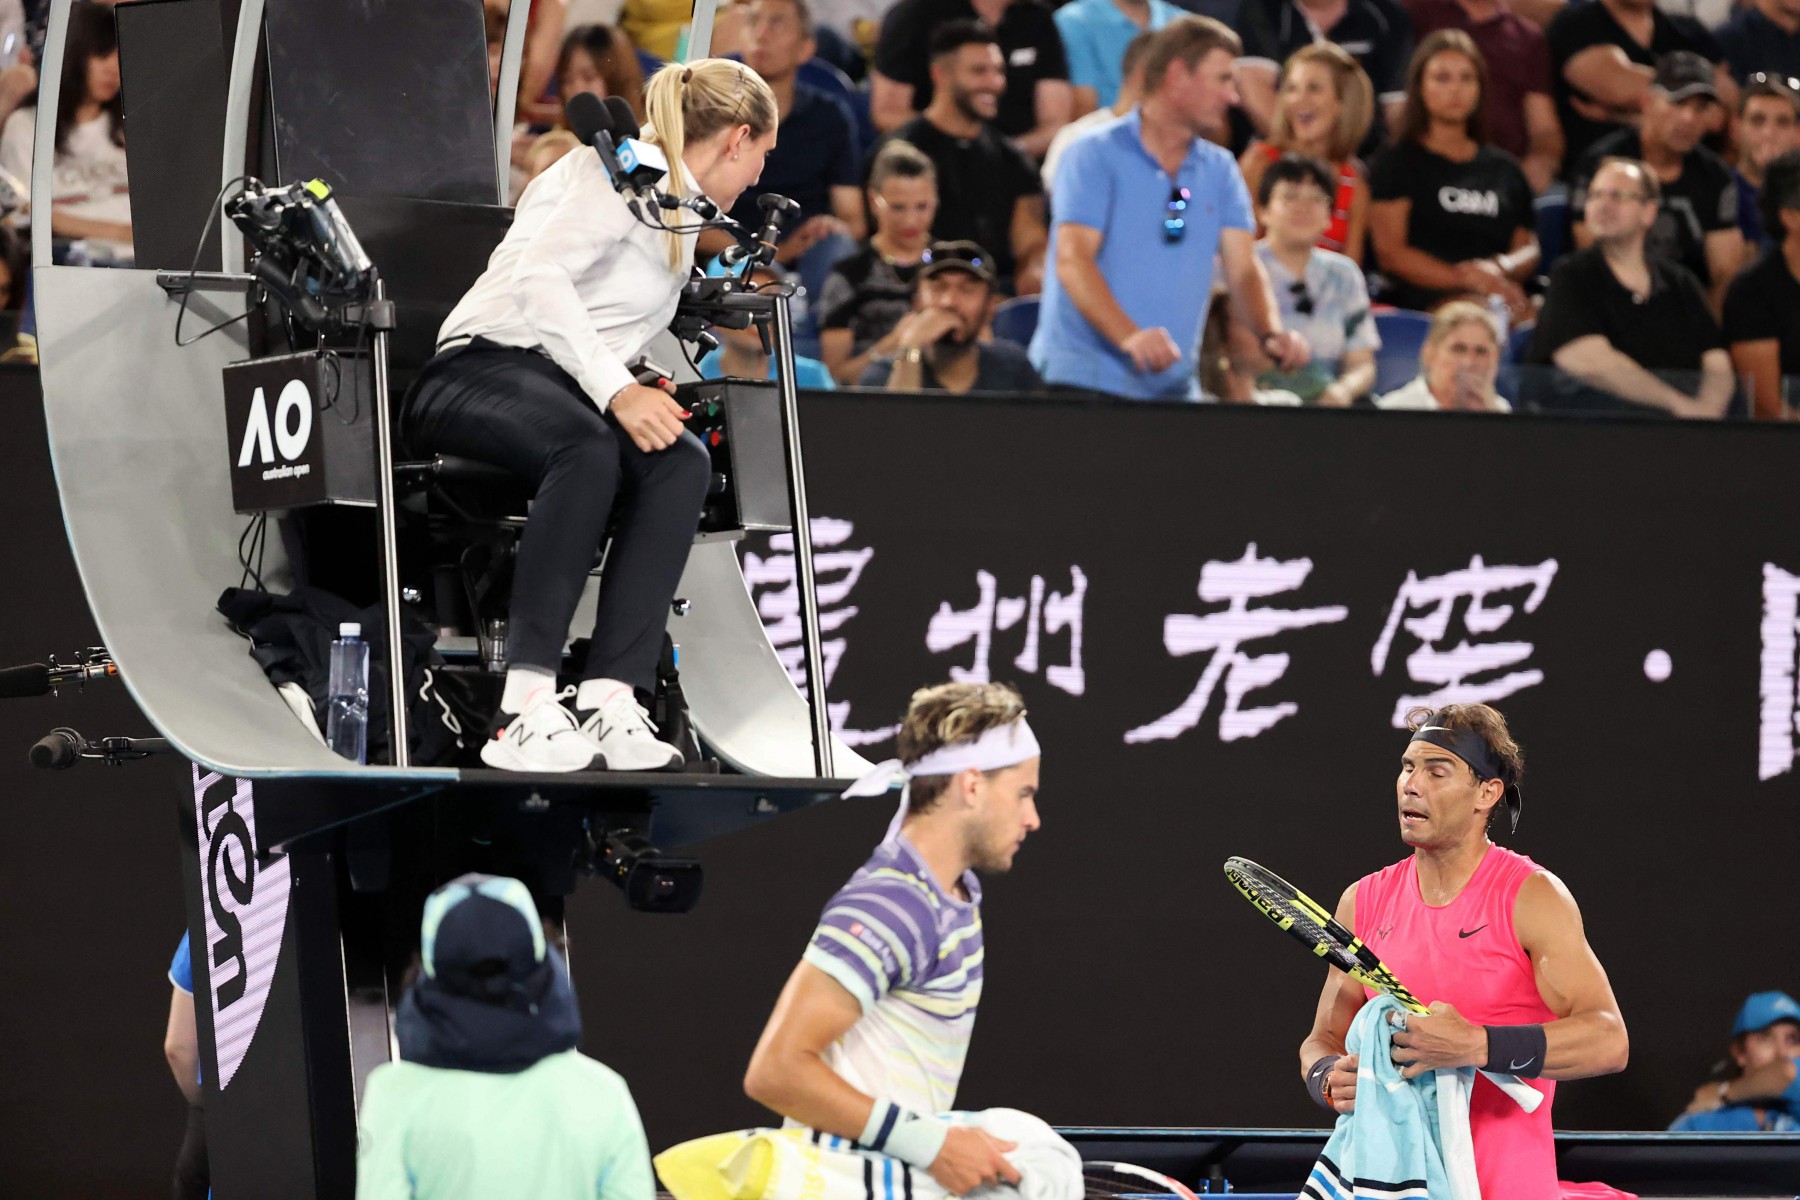 Nadal got frustrated with chair umpire Aurelie Tourte during the clash on Rod Laver Arena